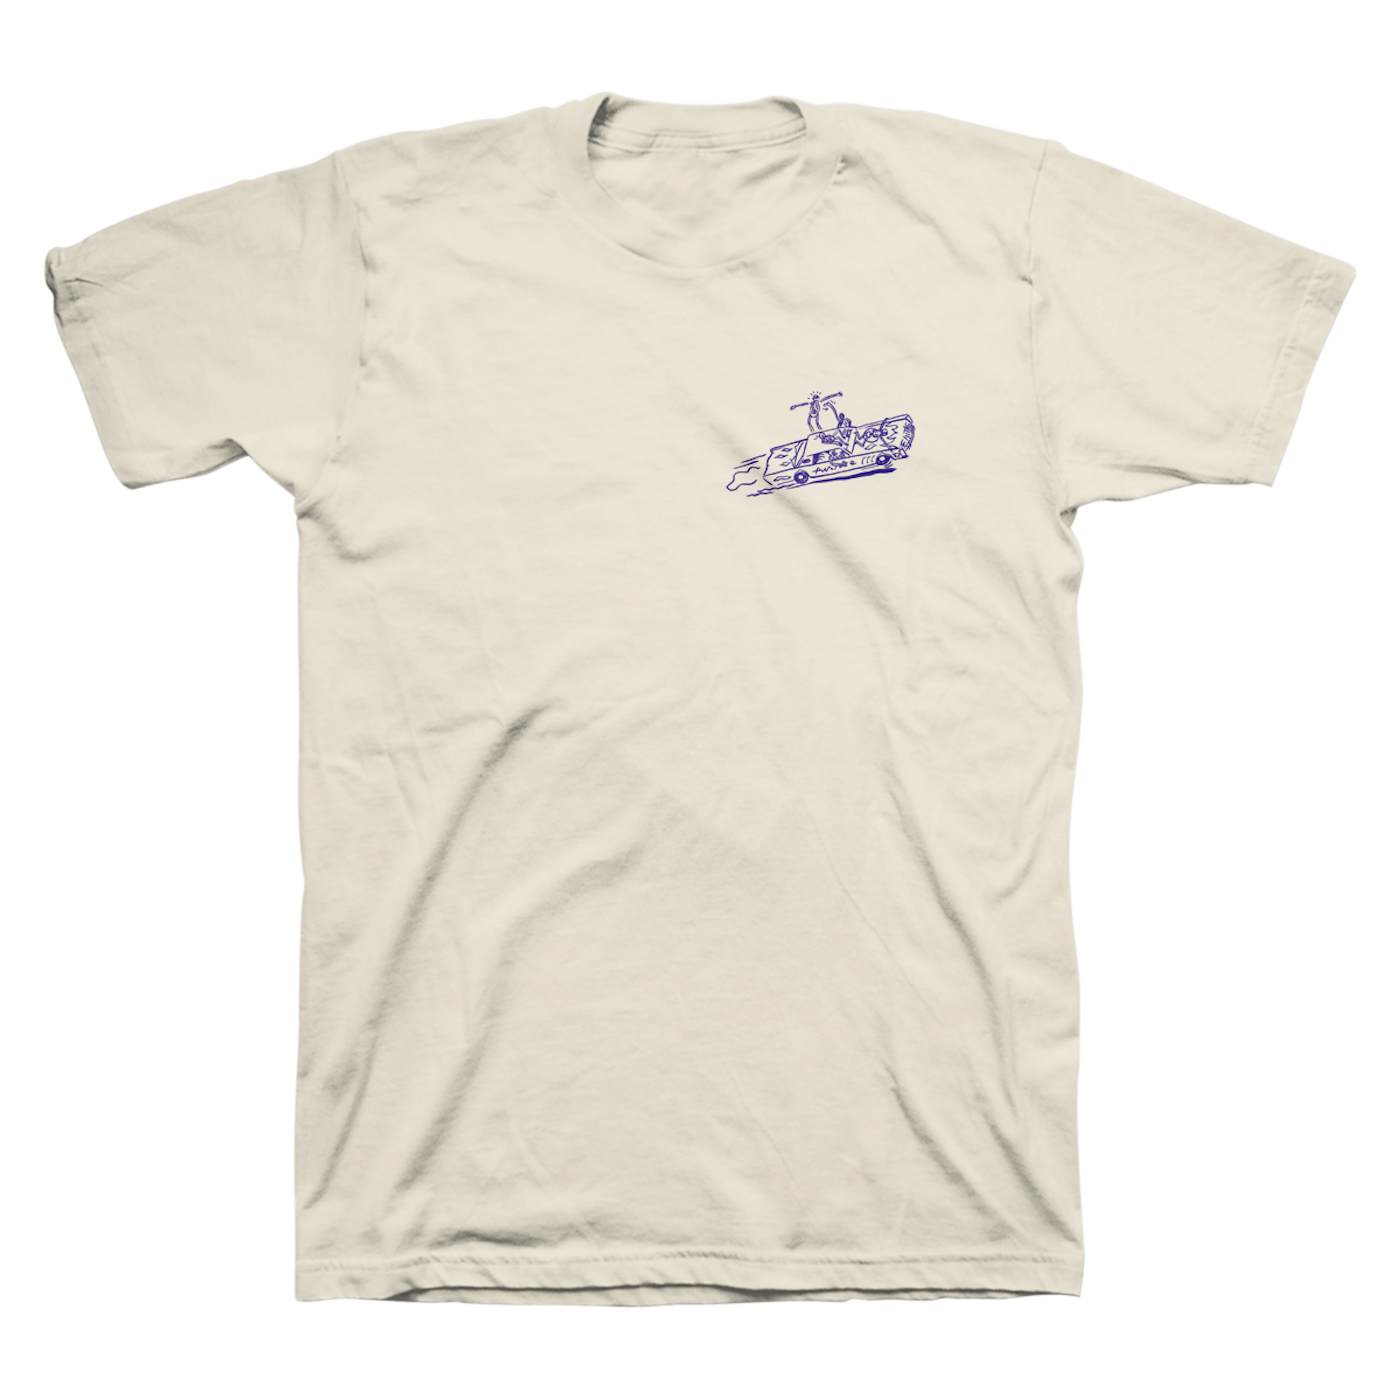 The Growlers Spring 2020 Tour T-Shirt